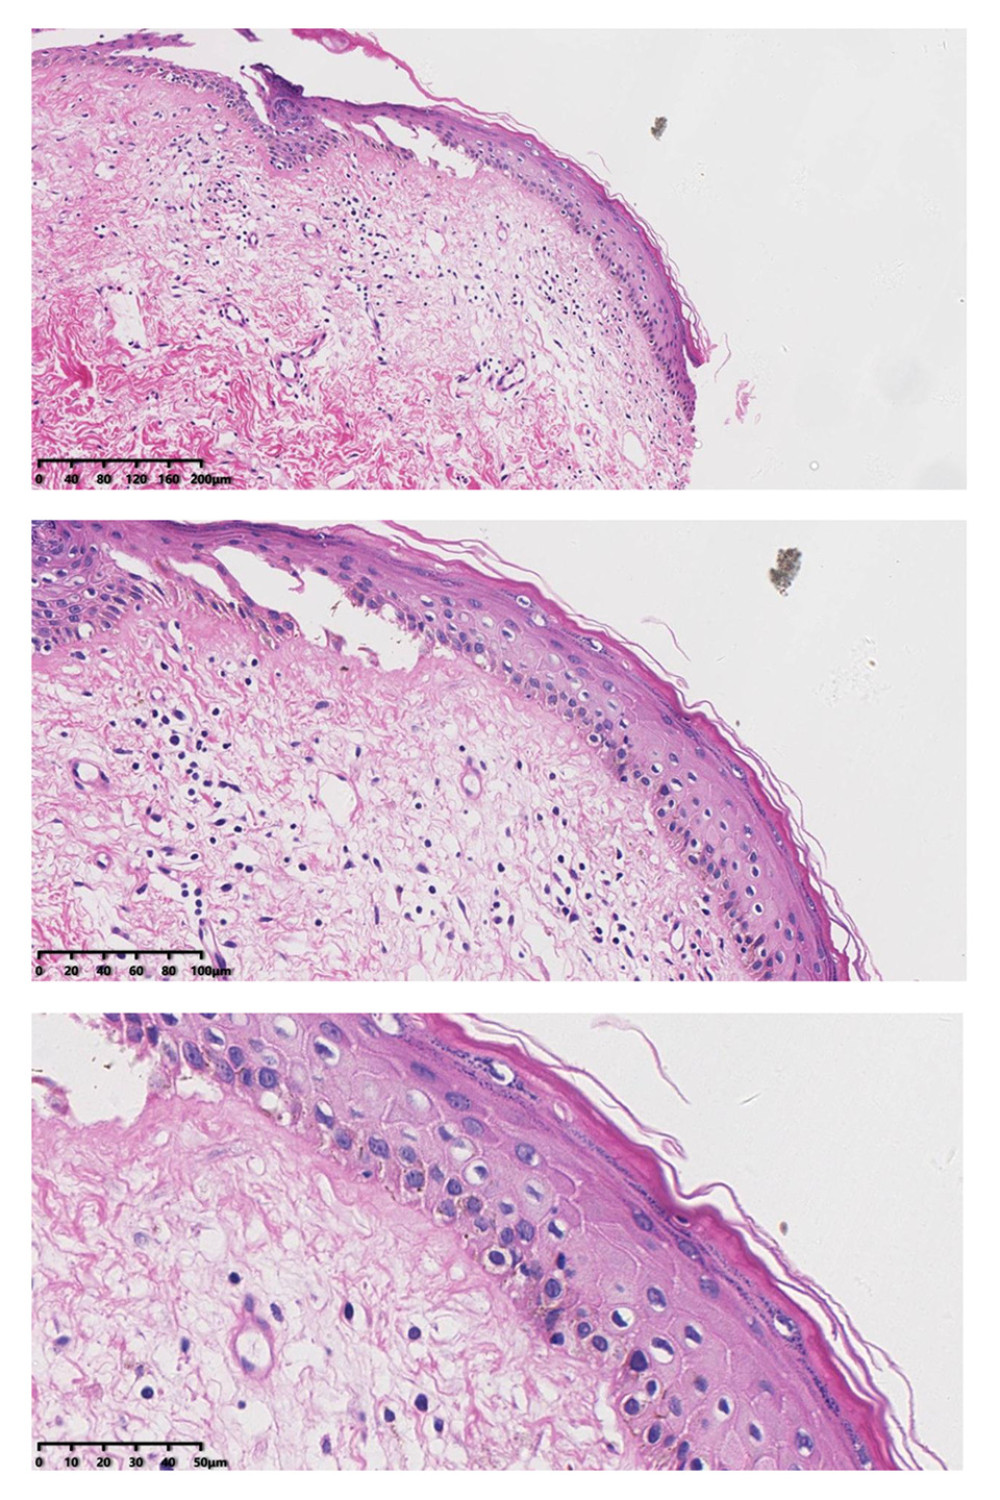 After treatment, histopathology results showed that chronic inflammation and acellular collagen band in dermis disappeared and superficial epithelial vacuolar degeneration improved.